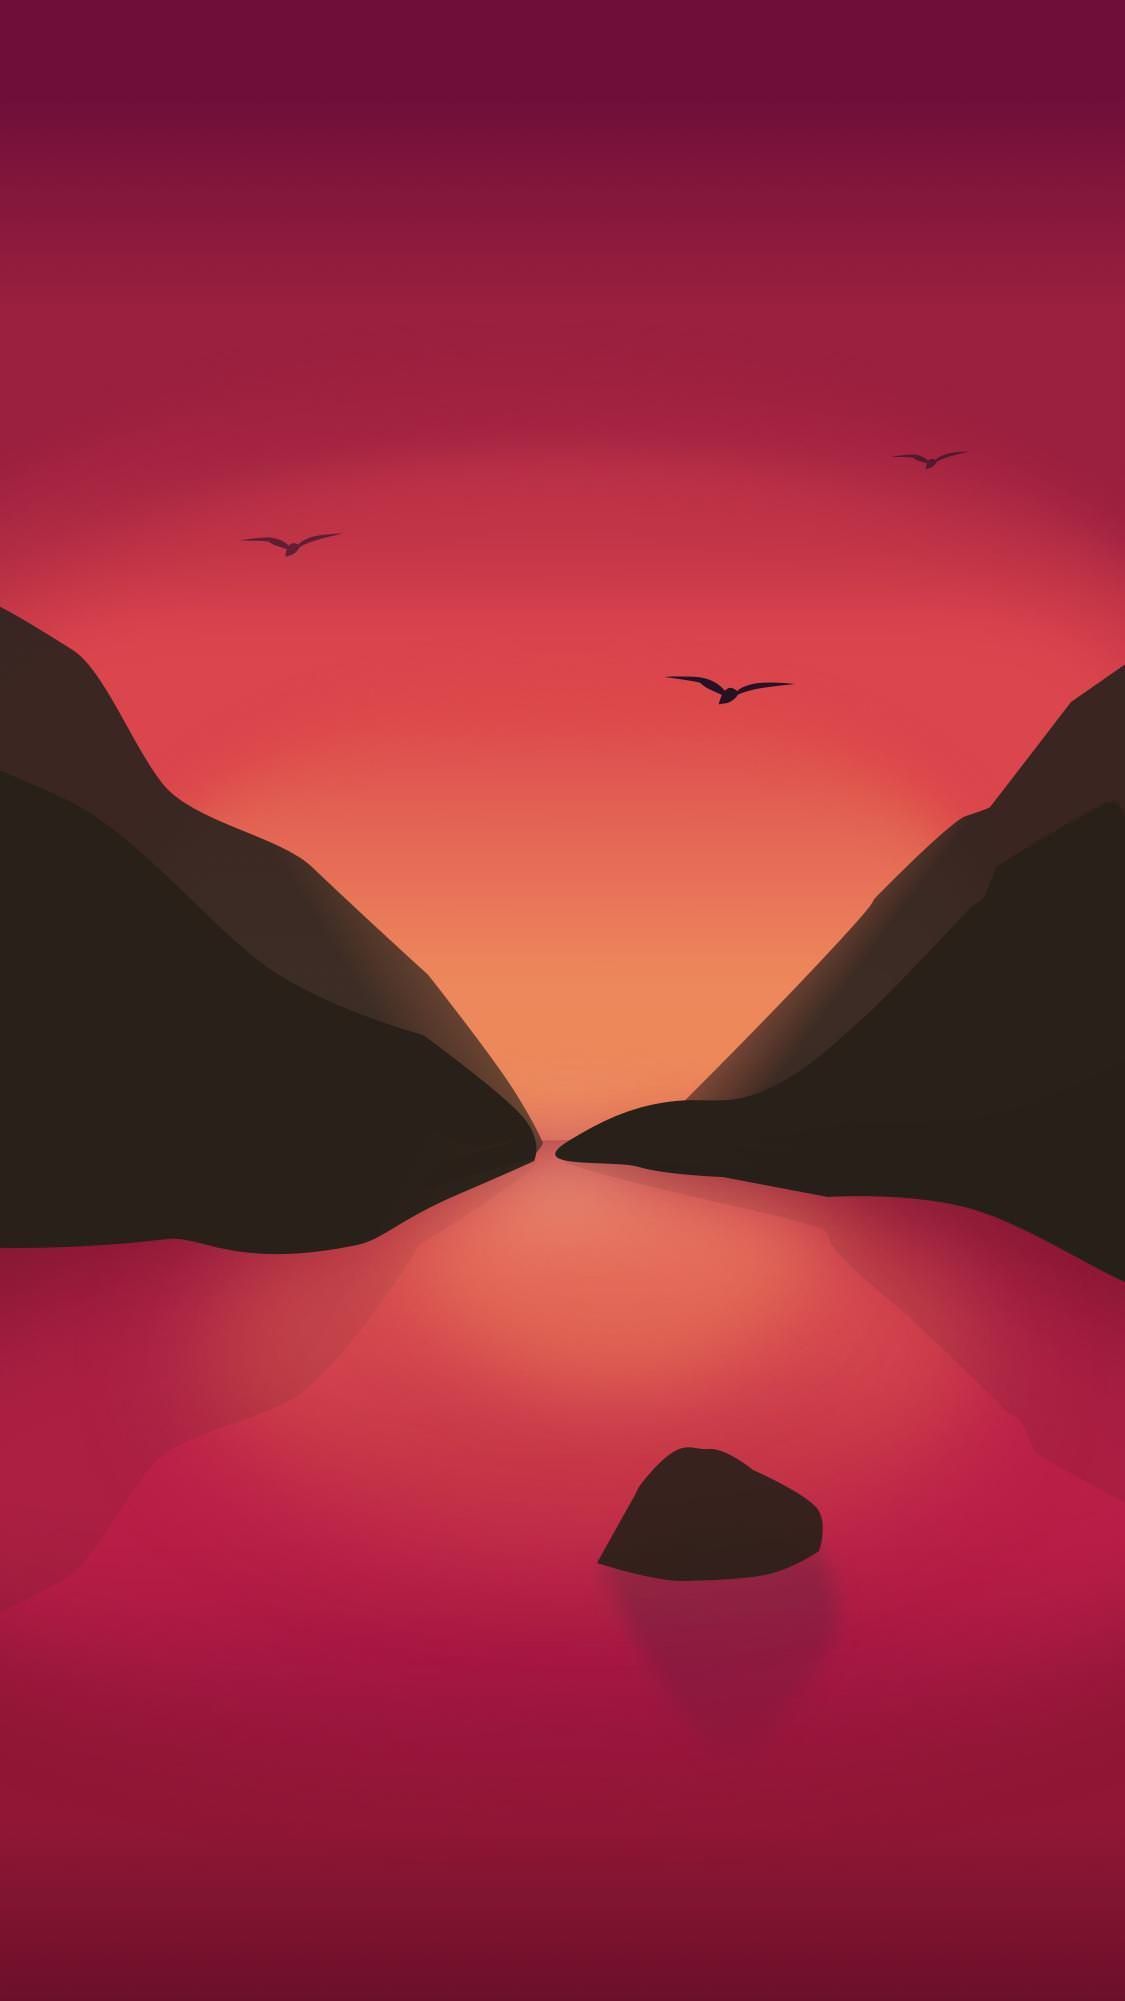 A sunset scene with mountains and water - Crimson